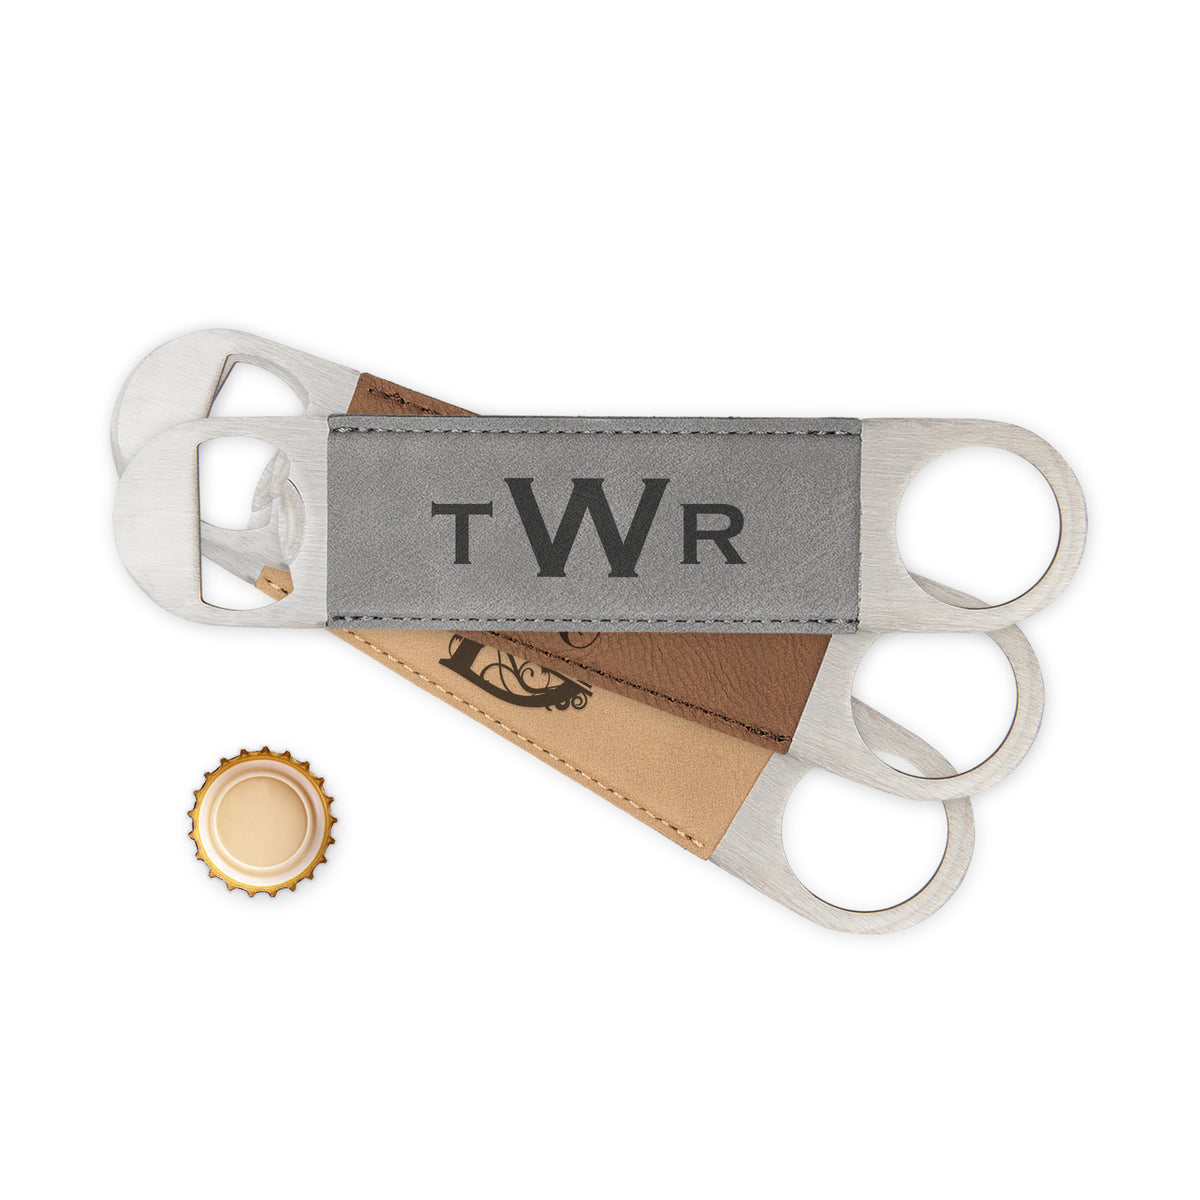 Engraved bottle opener, Personalized leather bottle opener, metal bottle opener / Laser engraved